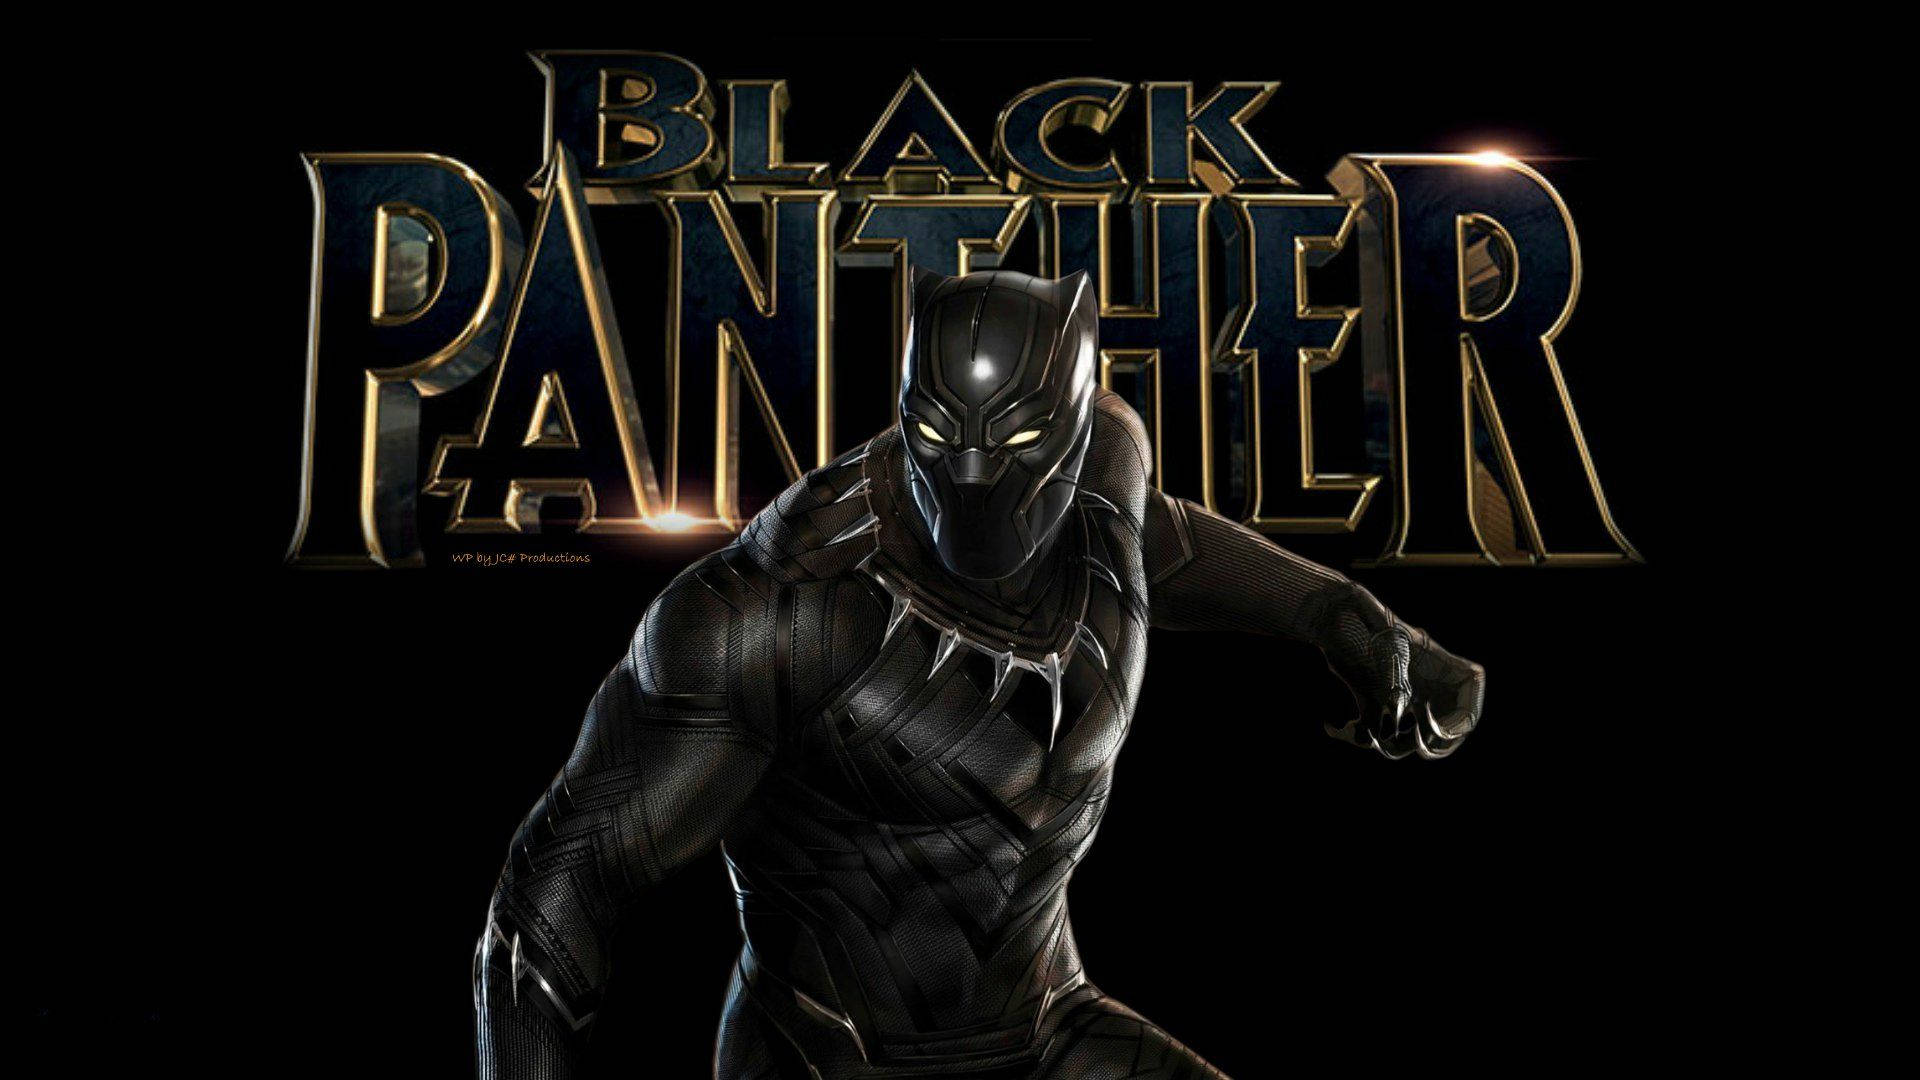 Black Panther Comic Book Cover Background